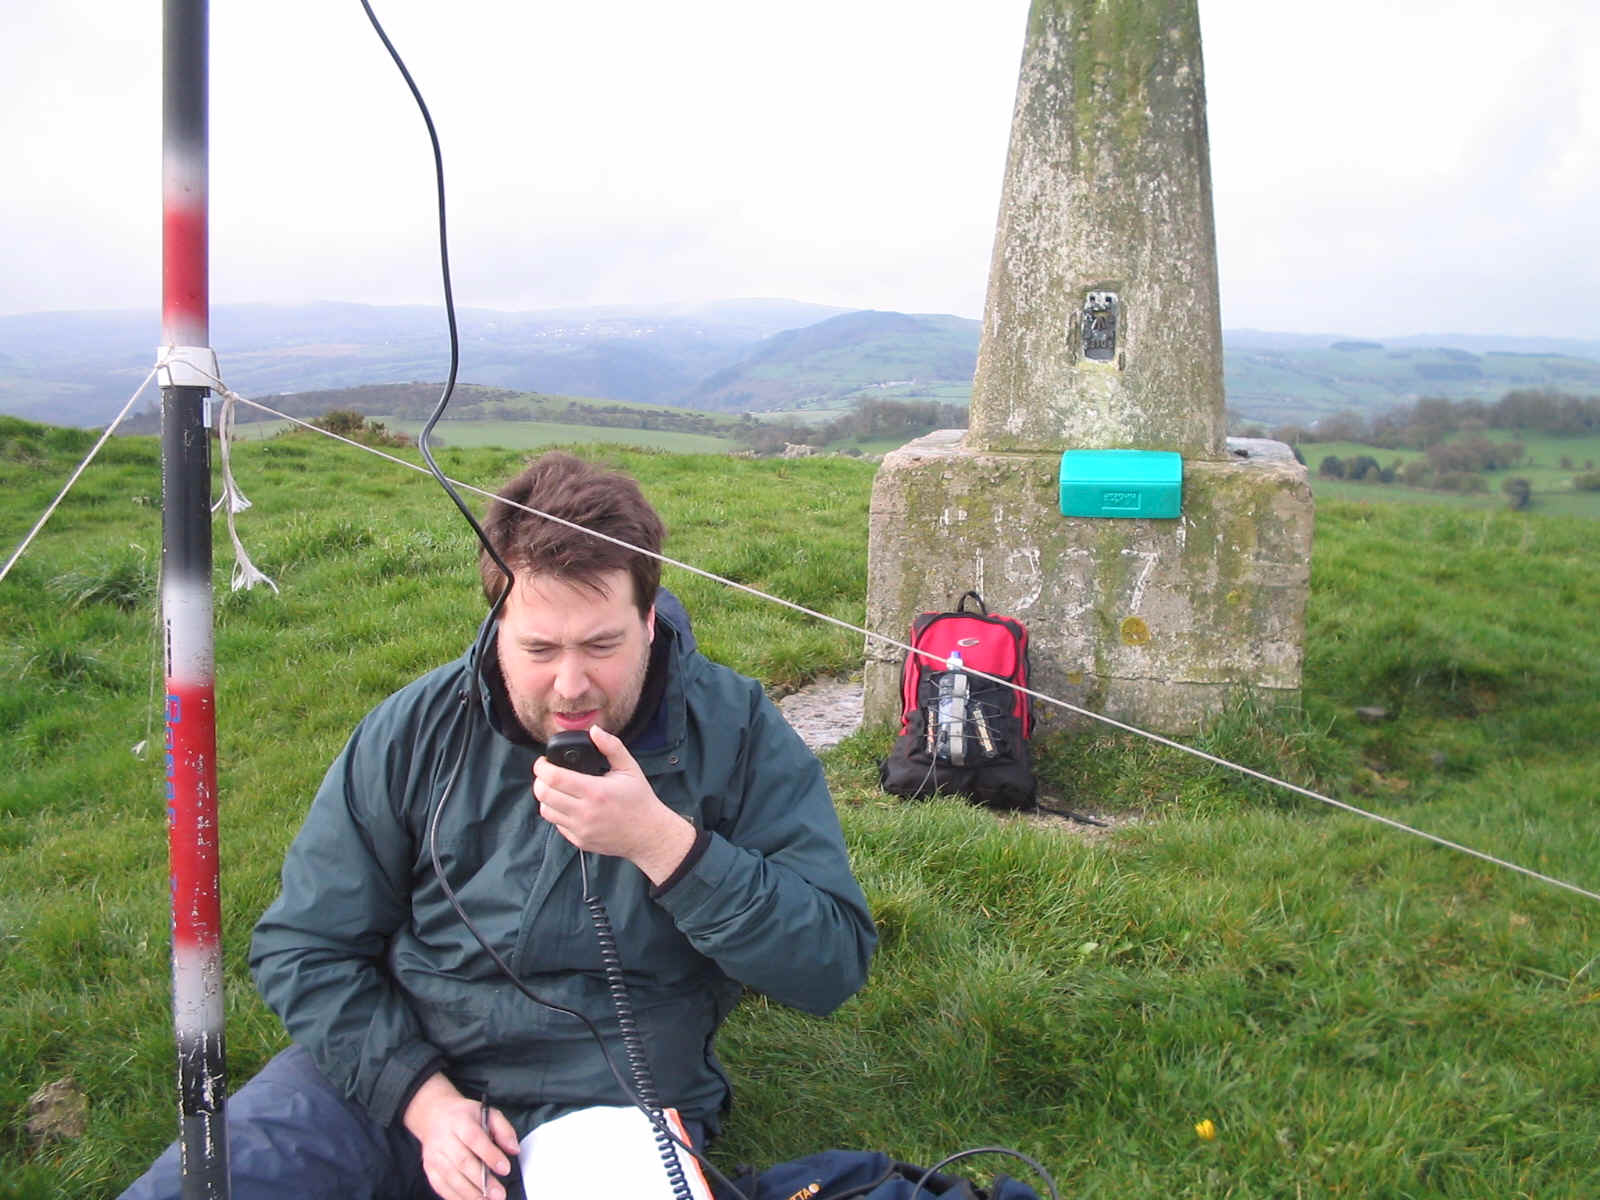 Tom MW1EYP/P operating from GW/NW-062